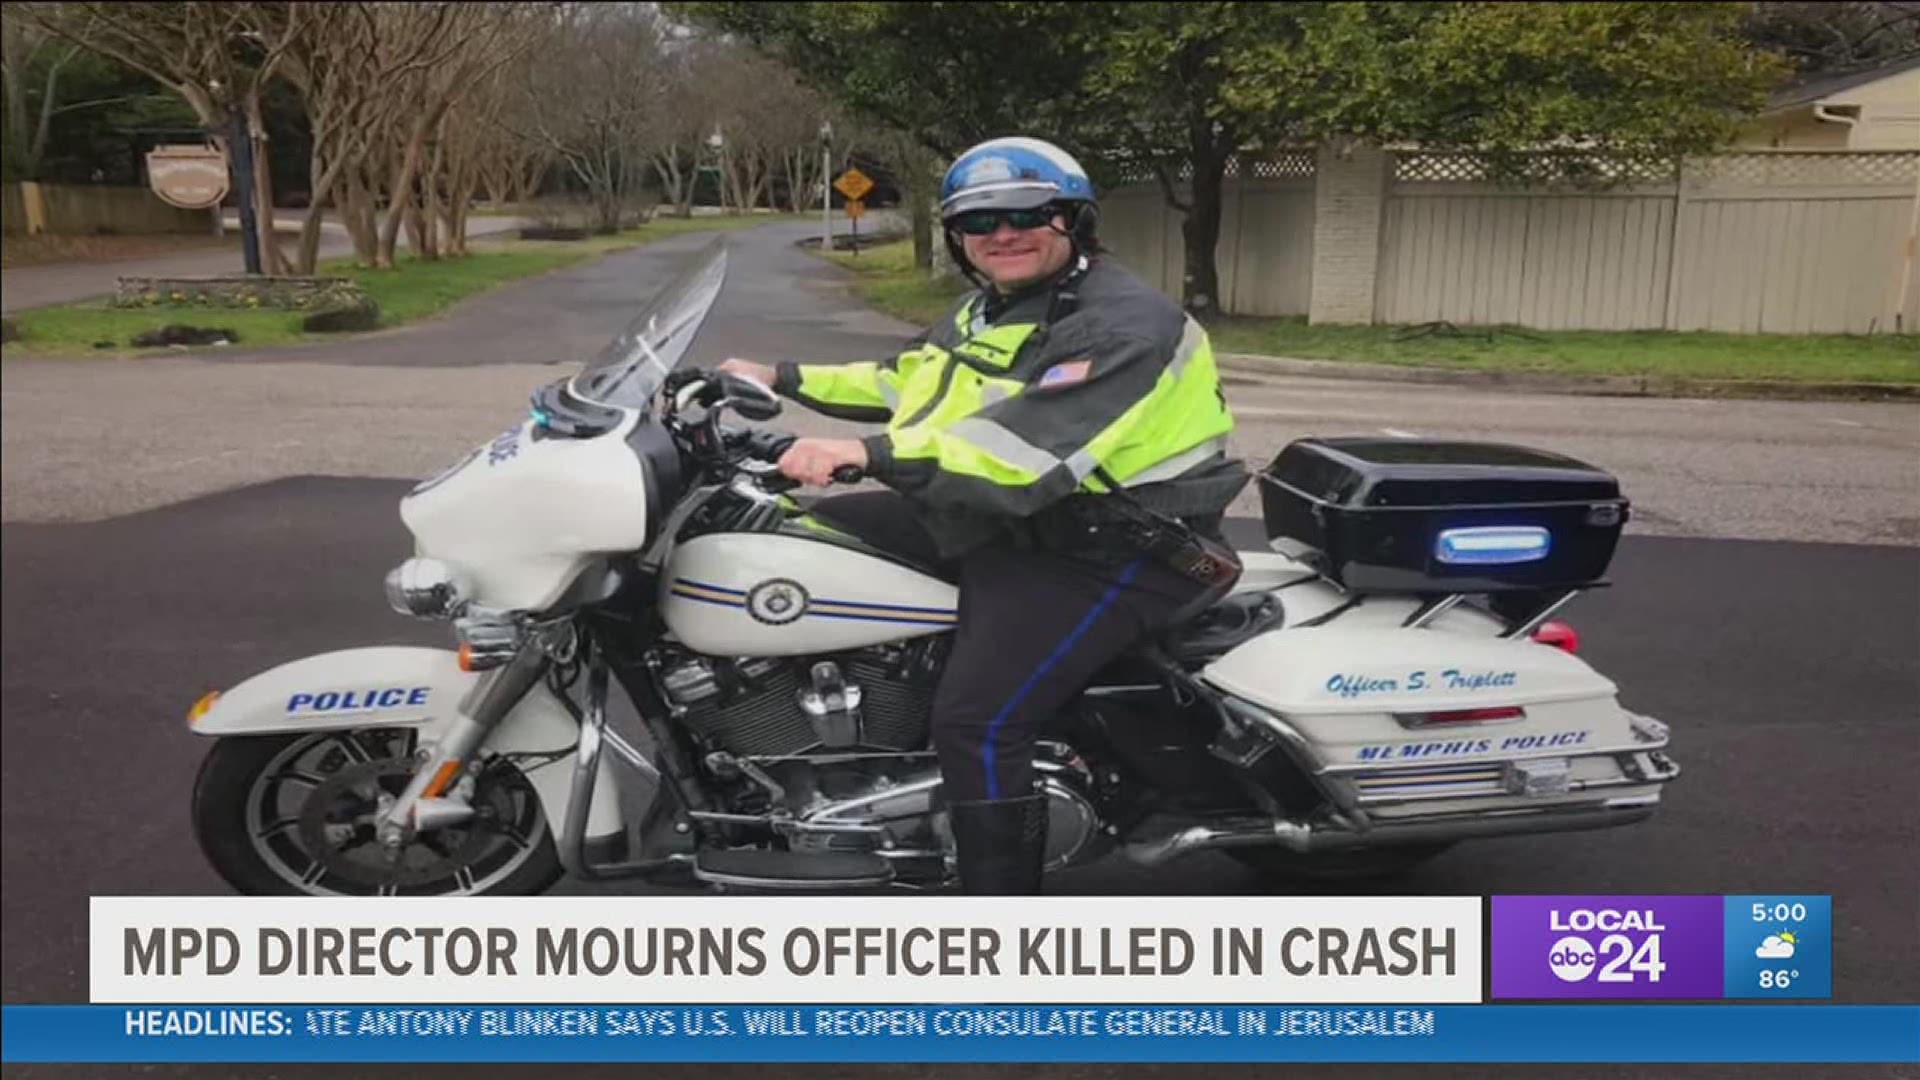 Officer Triplett died Saturday on duty after being hit by a car assisting a motorcade in Hickory Hill. The funeral has been set for Friday.